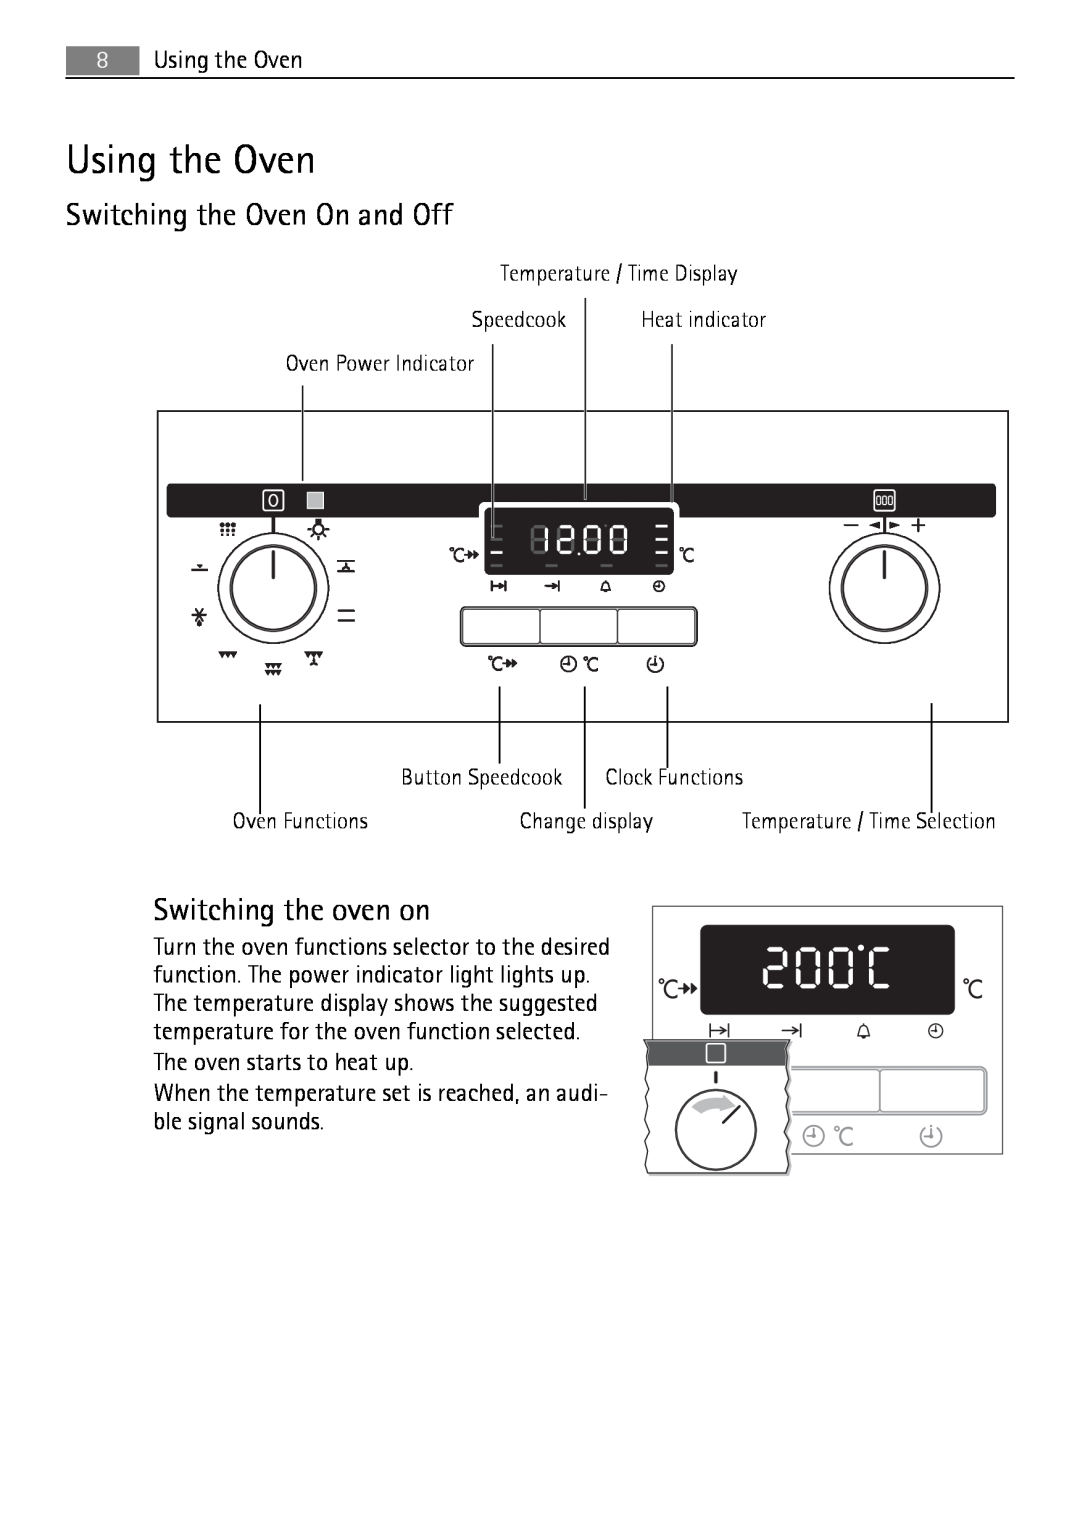 Electrolux B3741-5 user manual Using the Oven, Switching the Oven On and Off, Switching the oven on 